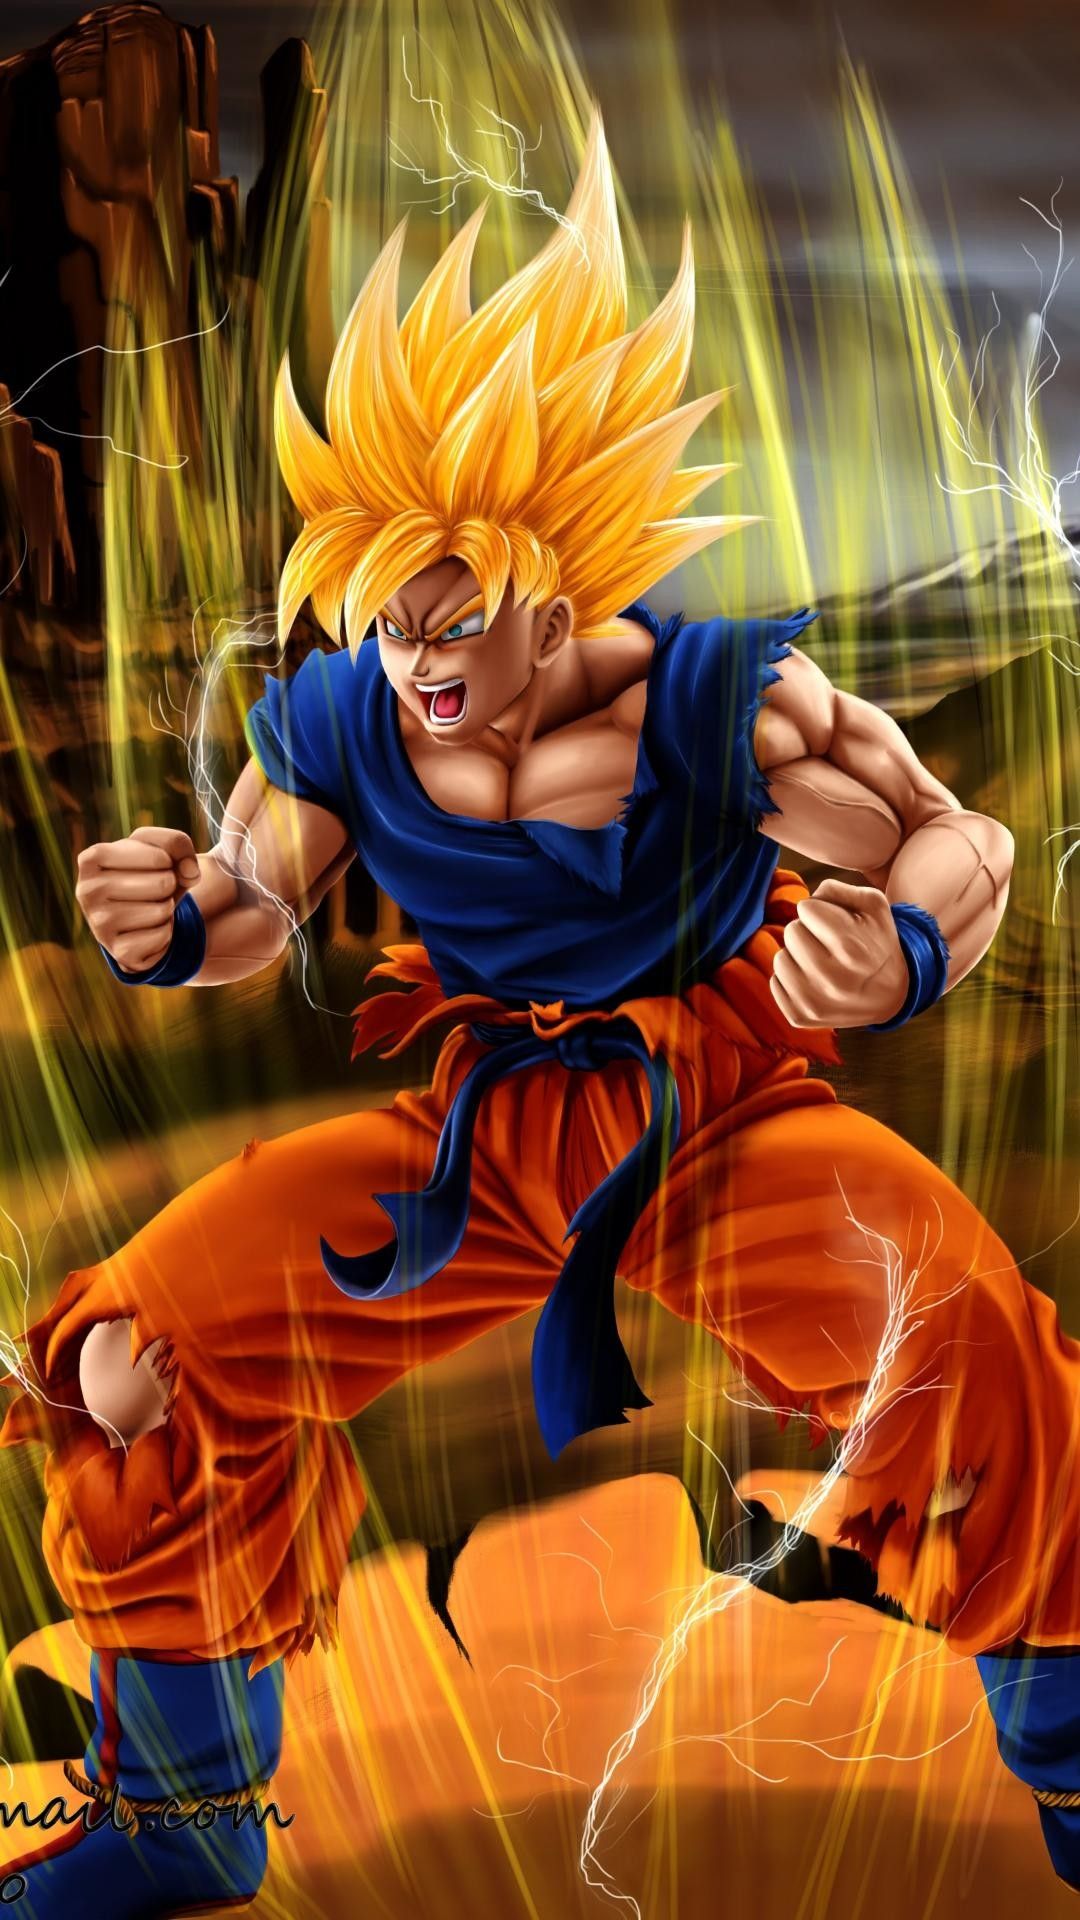 Dragon Ball Z Background, Cool Background, Image Ball Z HD Wallpaper For Mobile